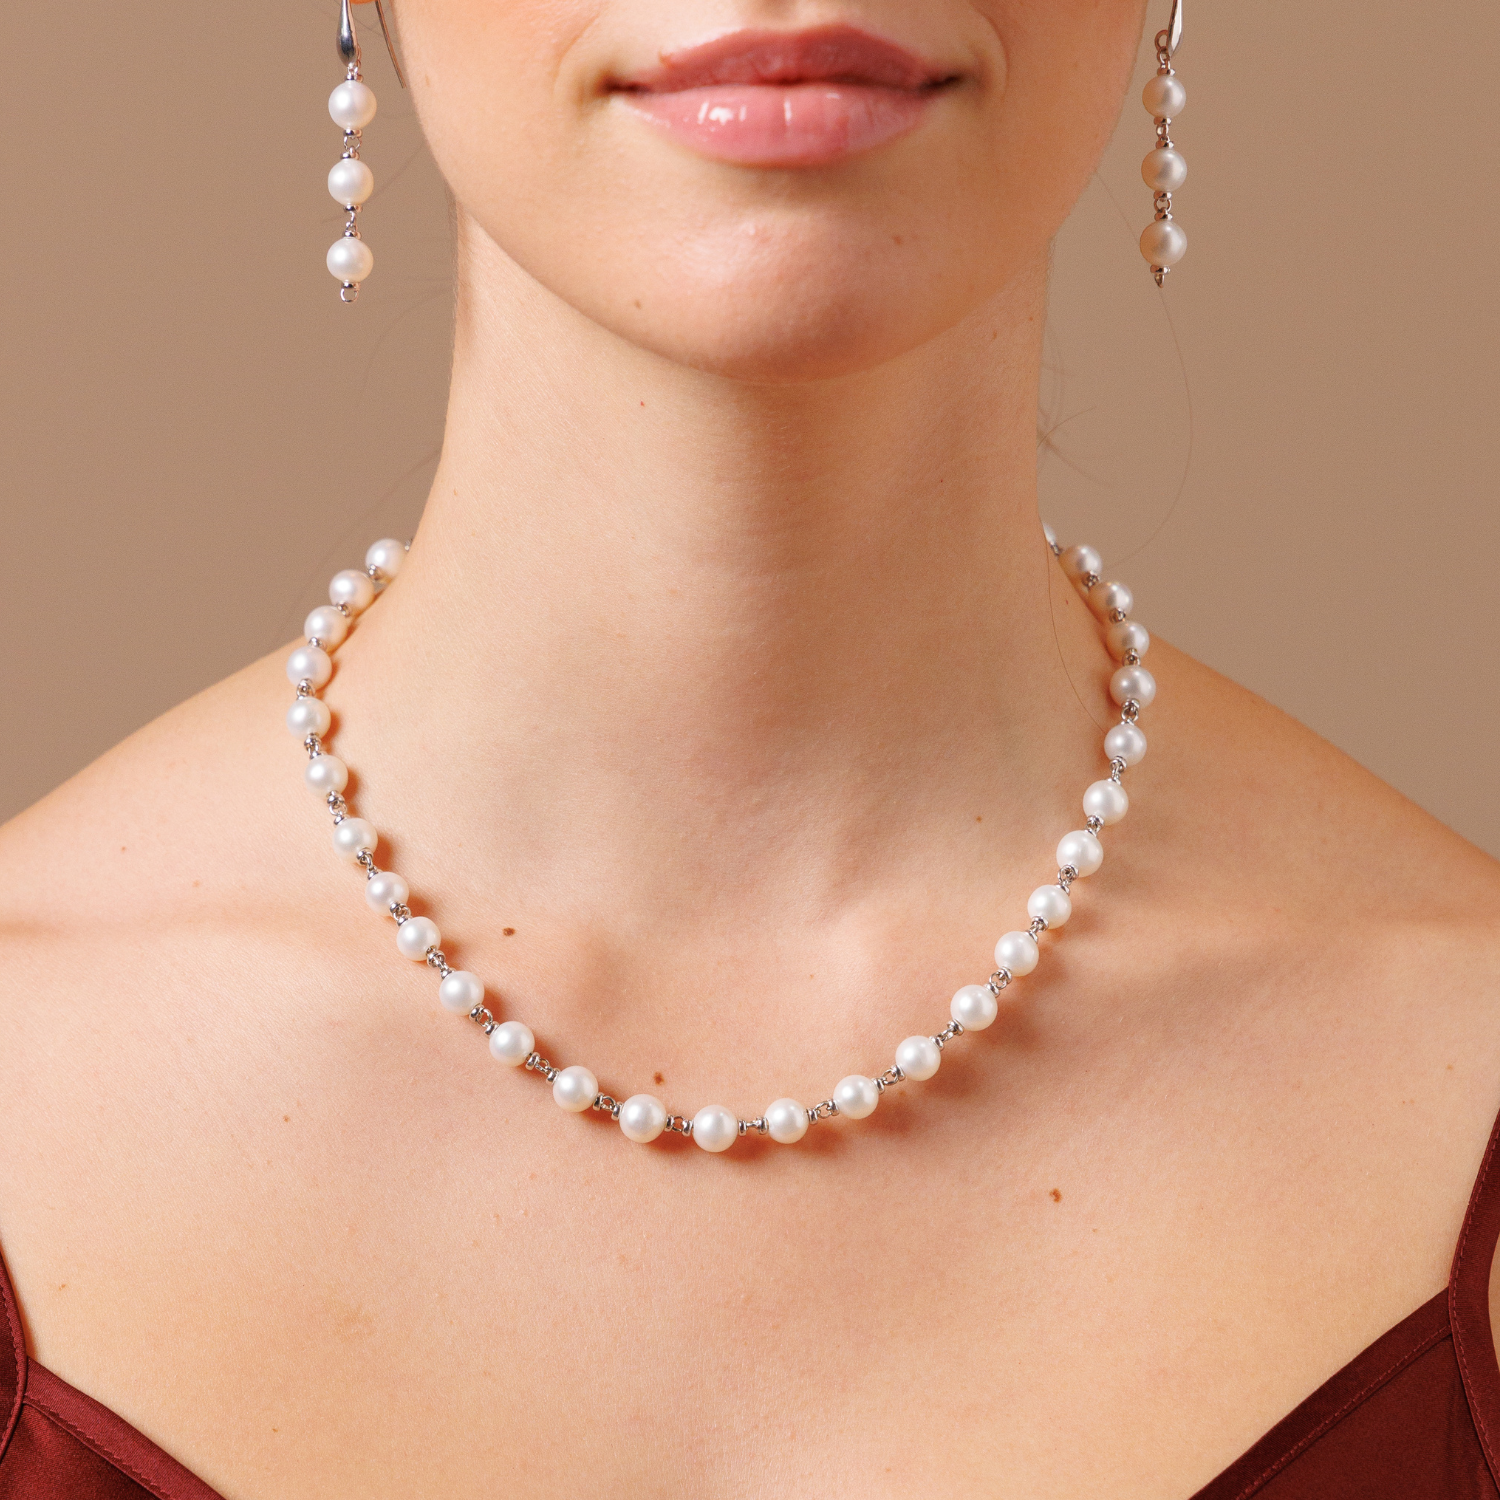 Real Freshwater Illusion Pearl Statement Necklace Multistrand Jewellery  With 9 Rows, White Color Illusion, Genuine And From Terisajewellery, $31.75  | DHgate.Com